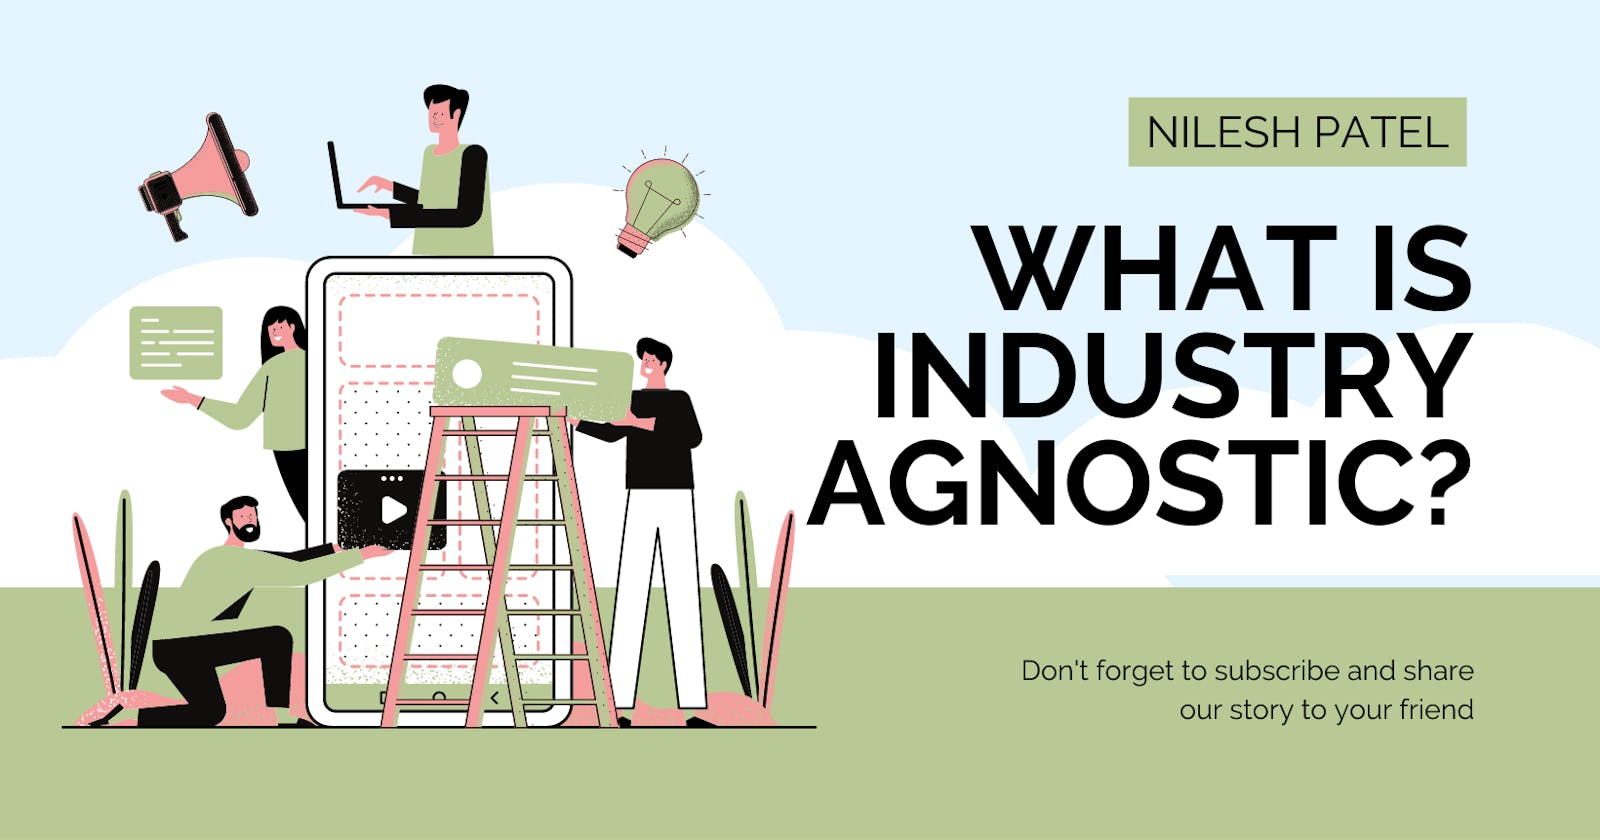 Industry Agnostic: Definition & Marketing for Business